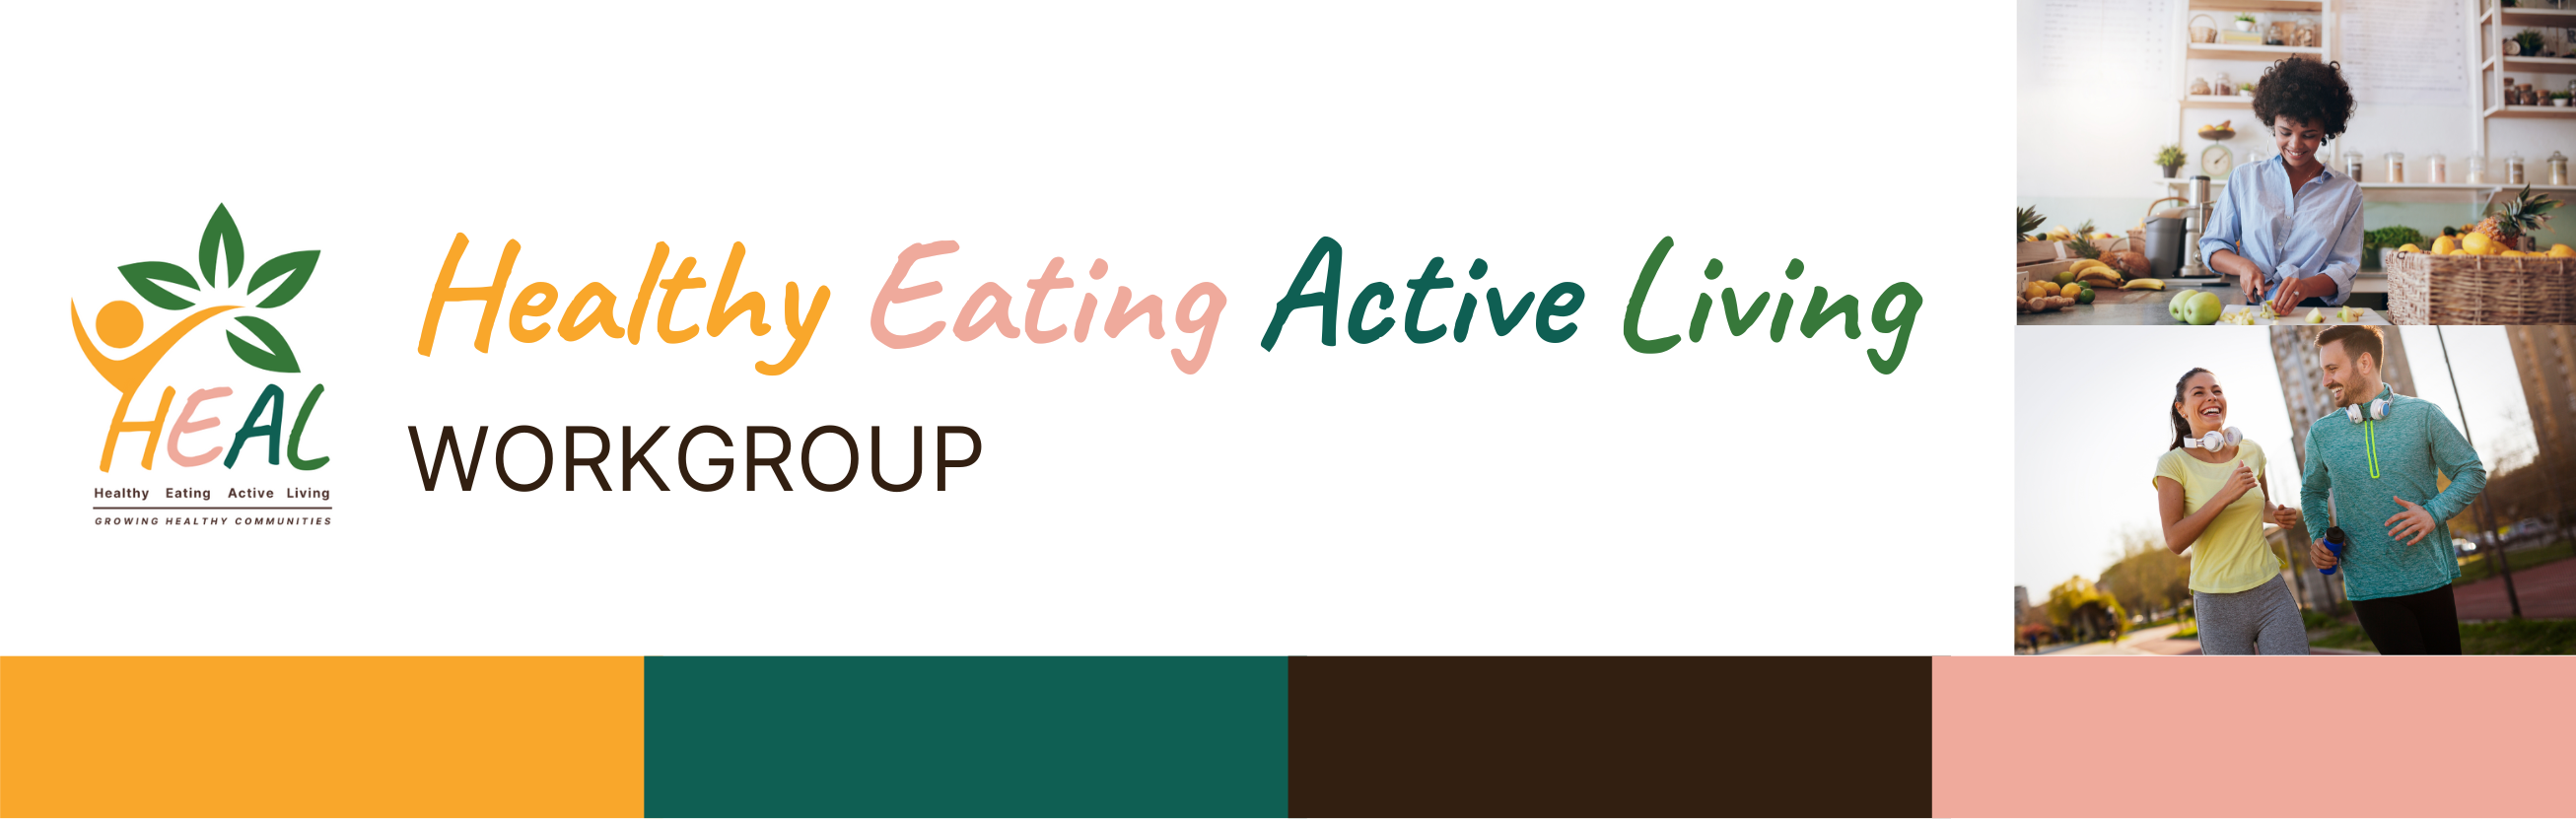 Healthy Eating Active Living